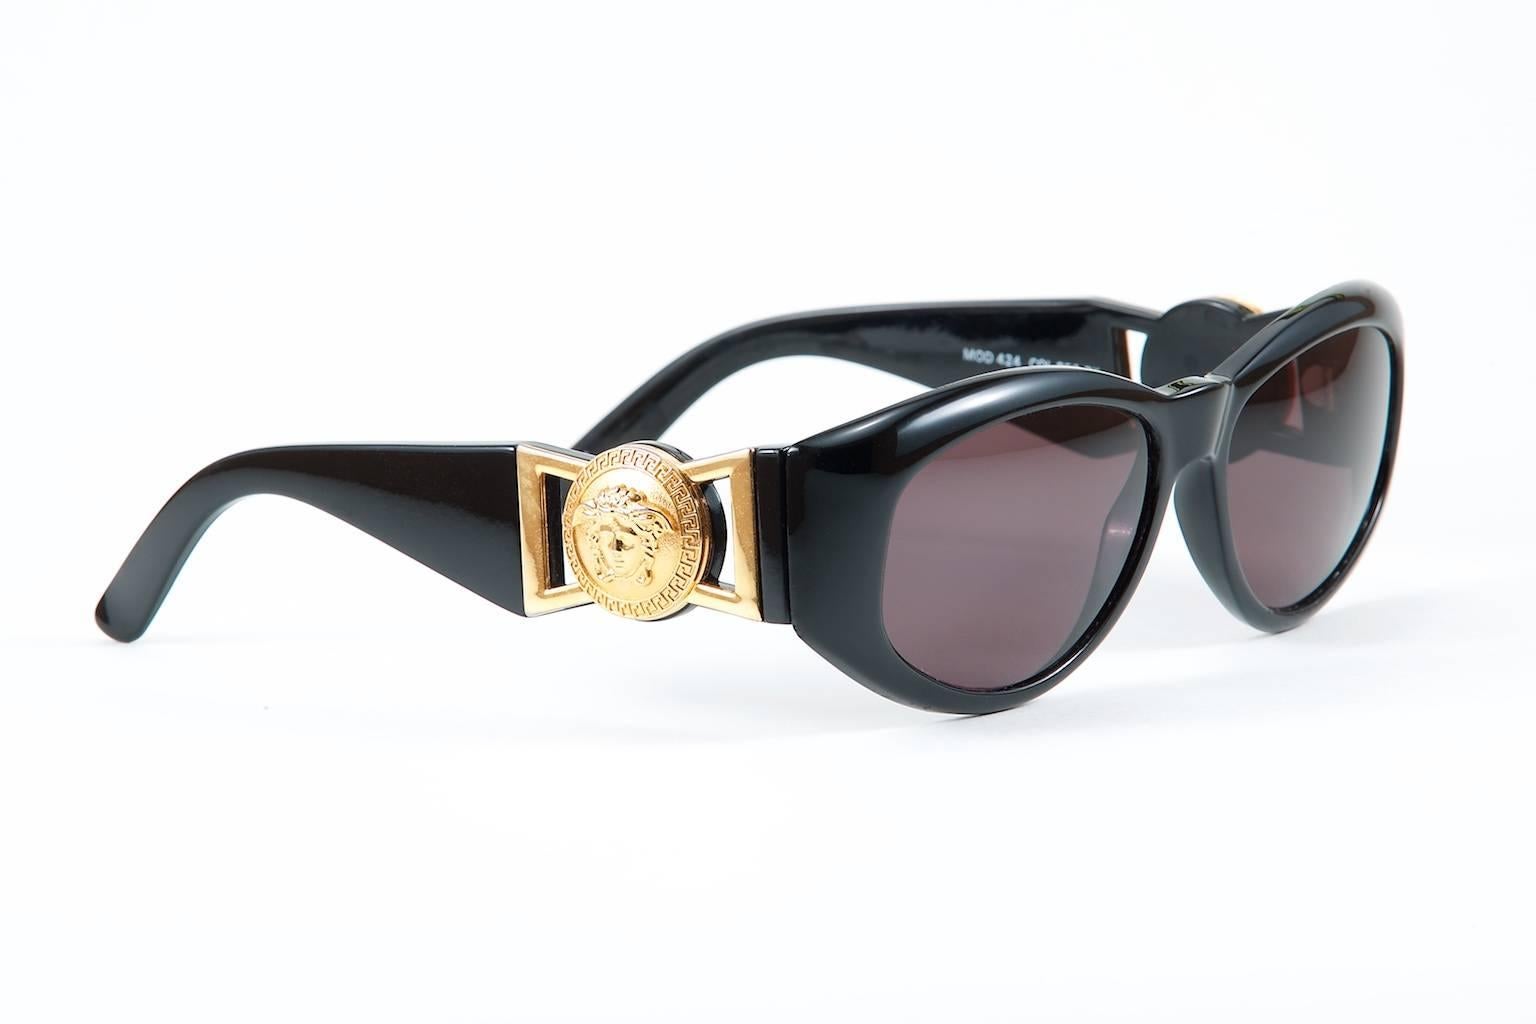 Men's 1990s Gianni Versace Sunglasses - Made in Italy